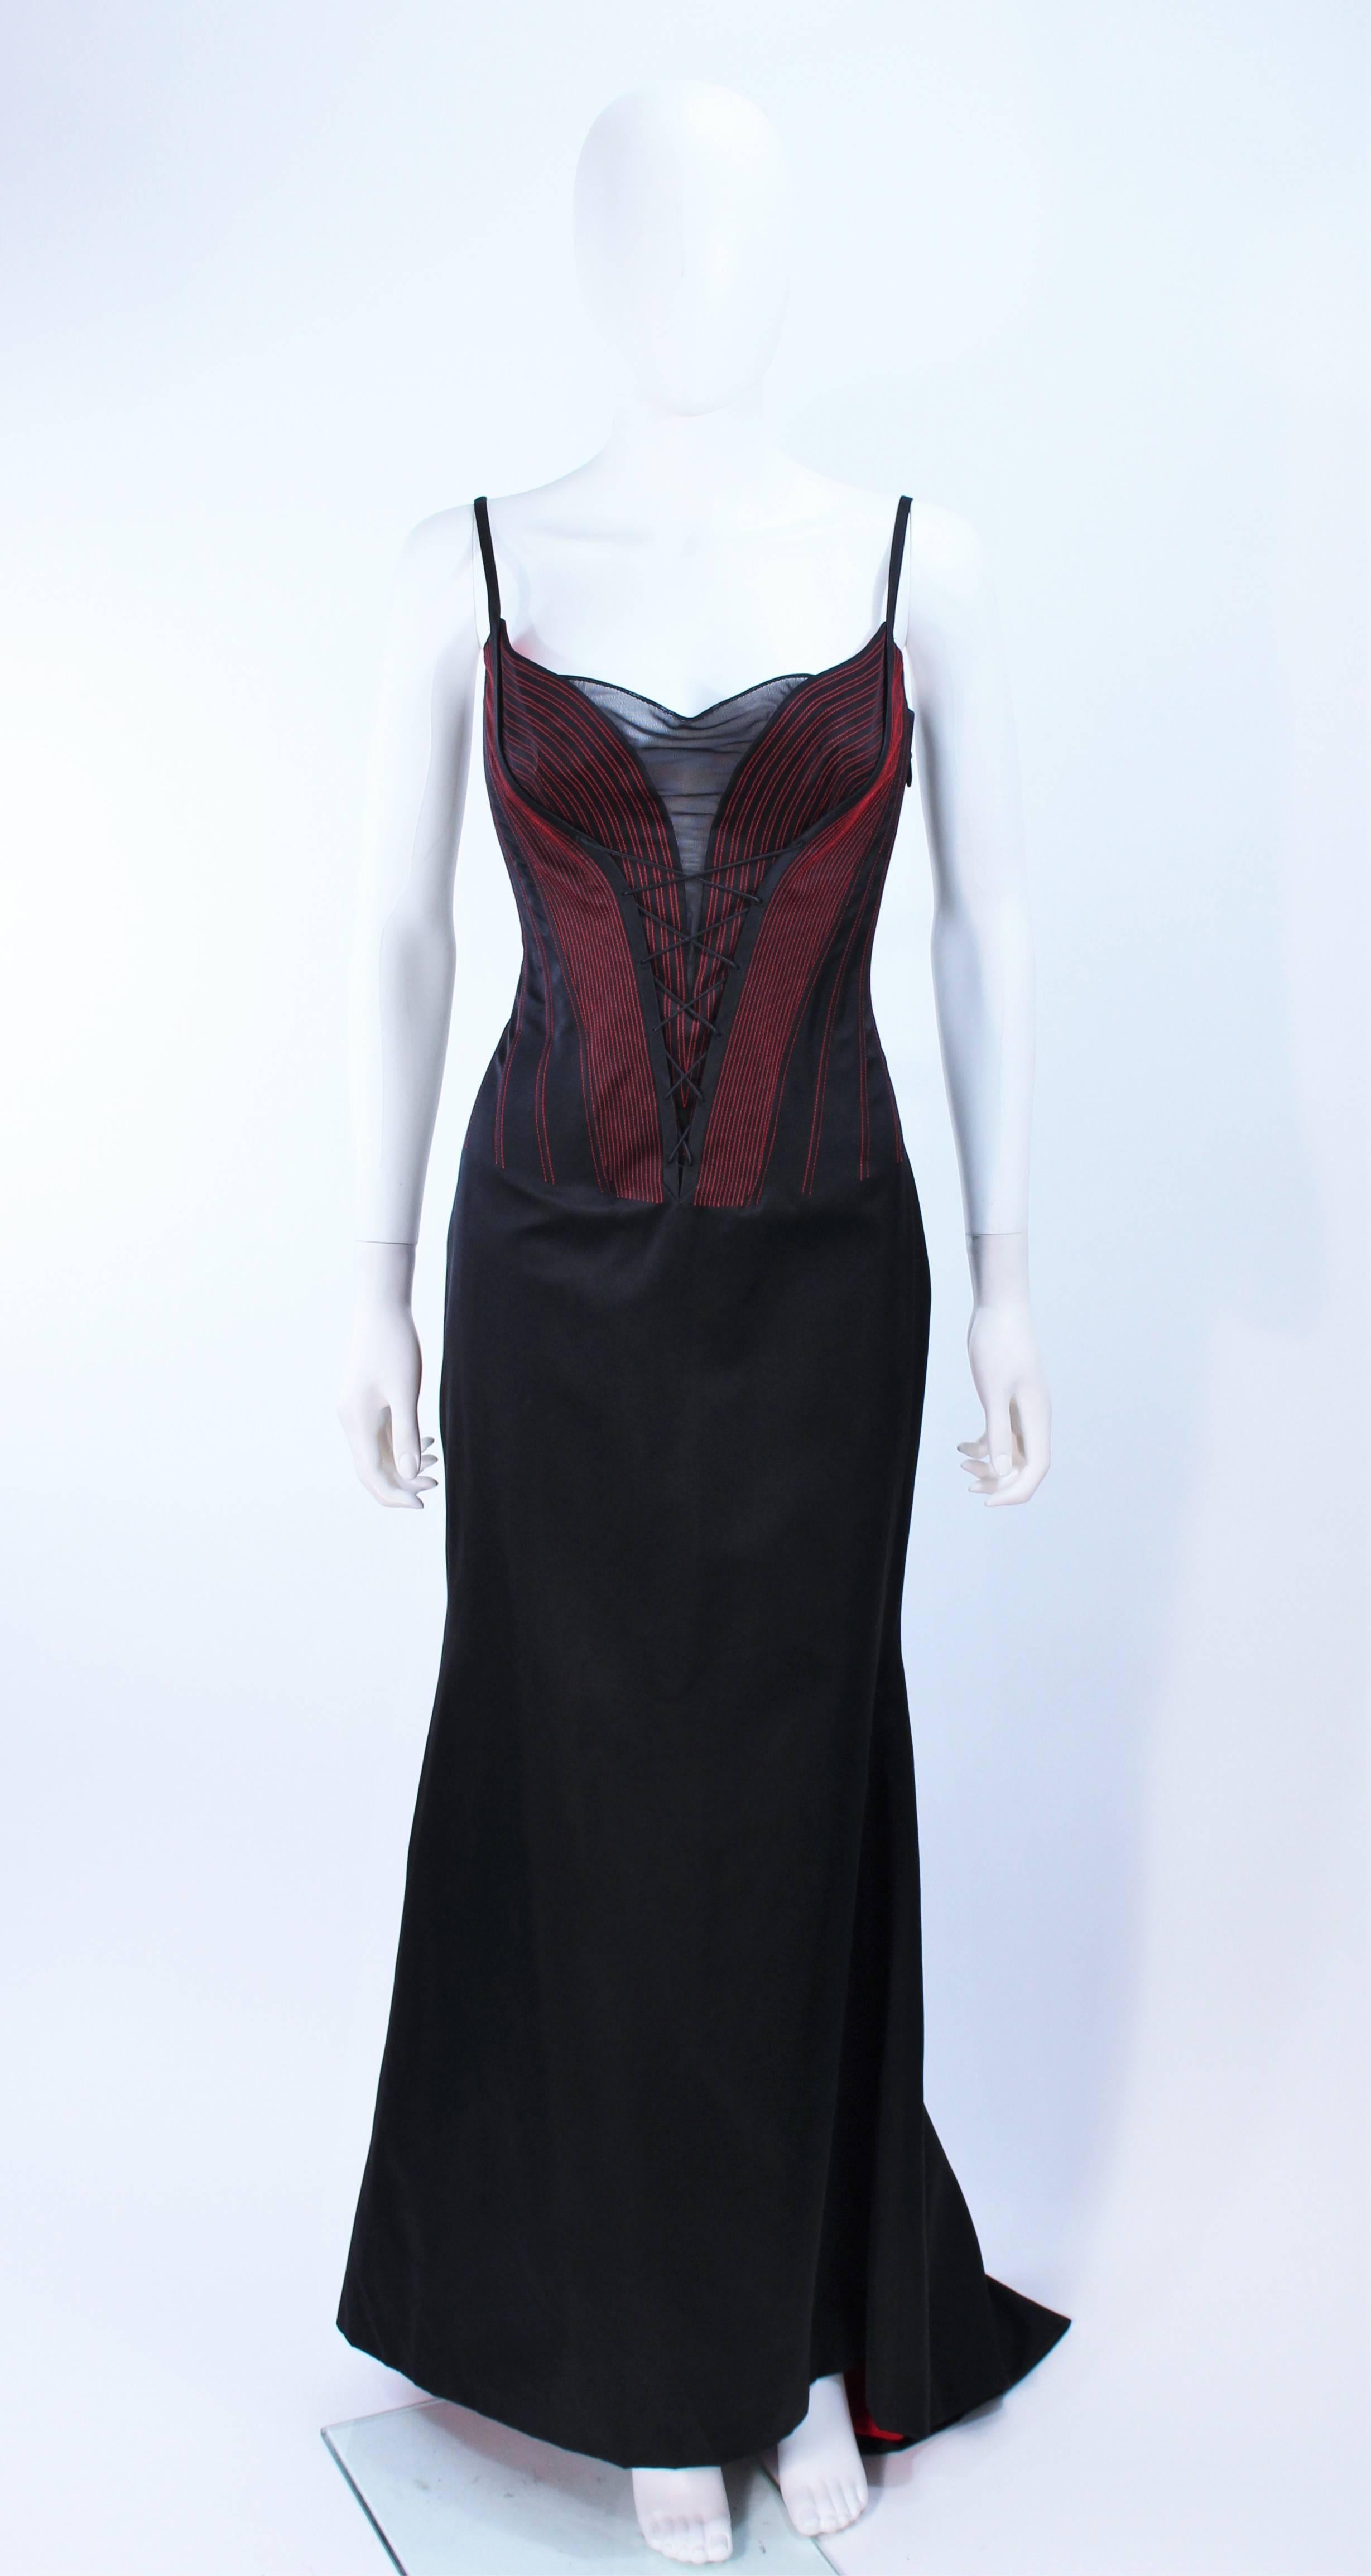 This Richard Tyler gown is composed of a black silk and features a vibrant red lining. There are top-stitch details as well as a corset style design. Side zipper closure. In excellent vintage condition.

**Please cross-reference measurements for